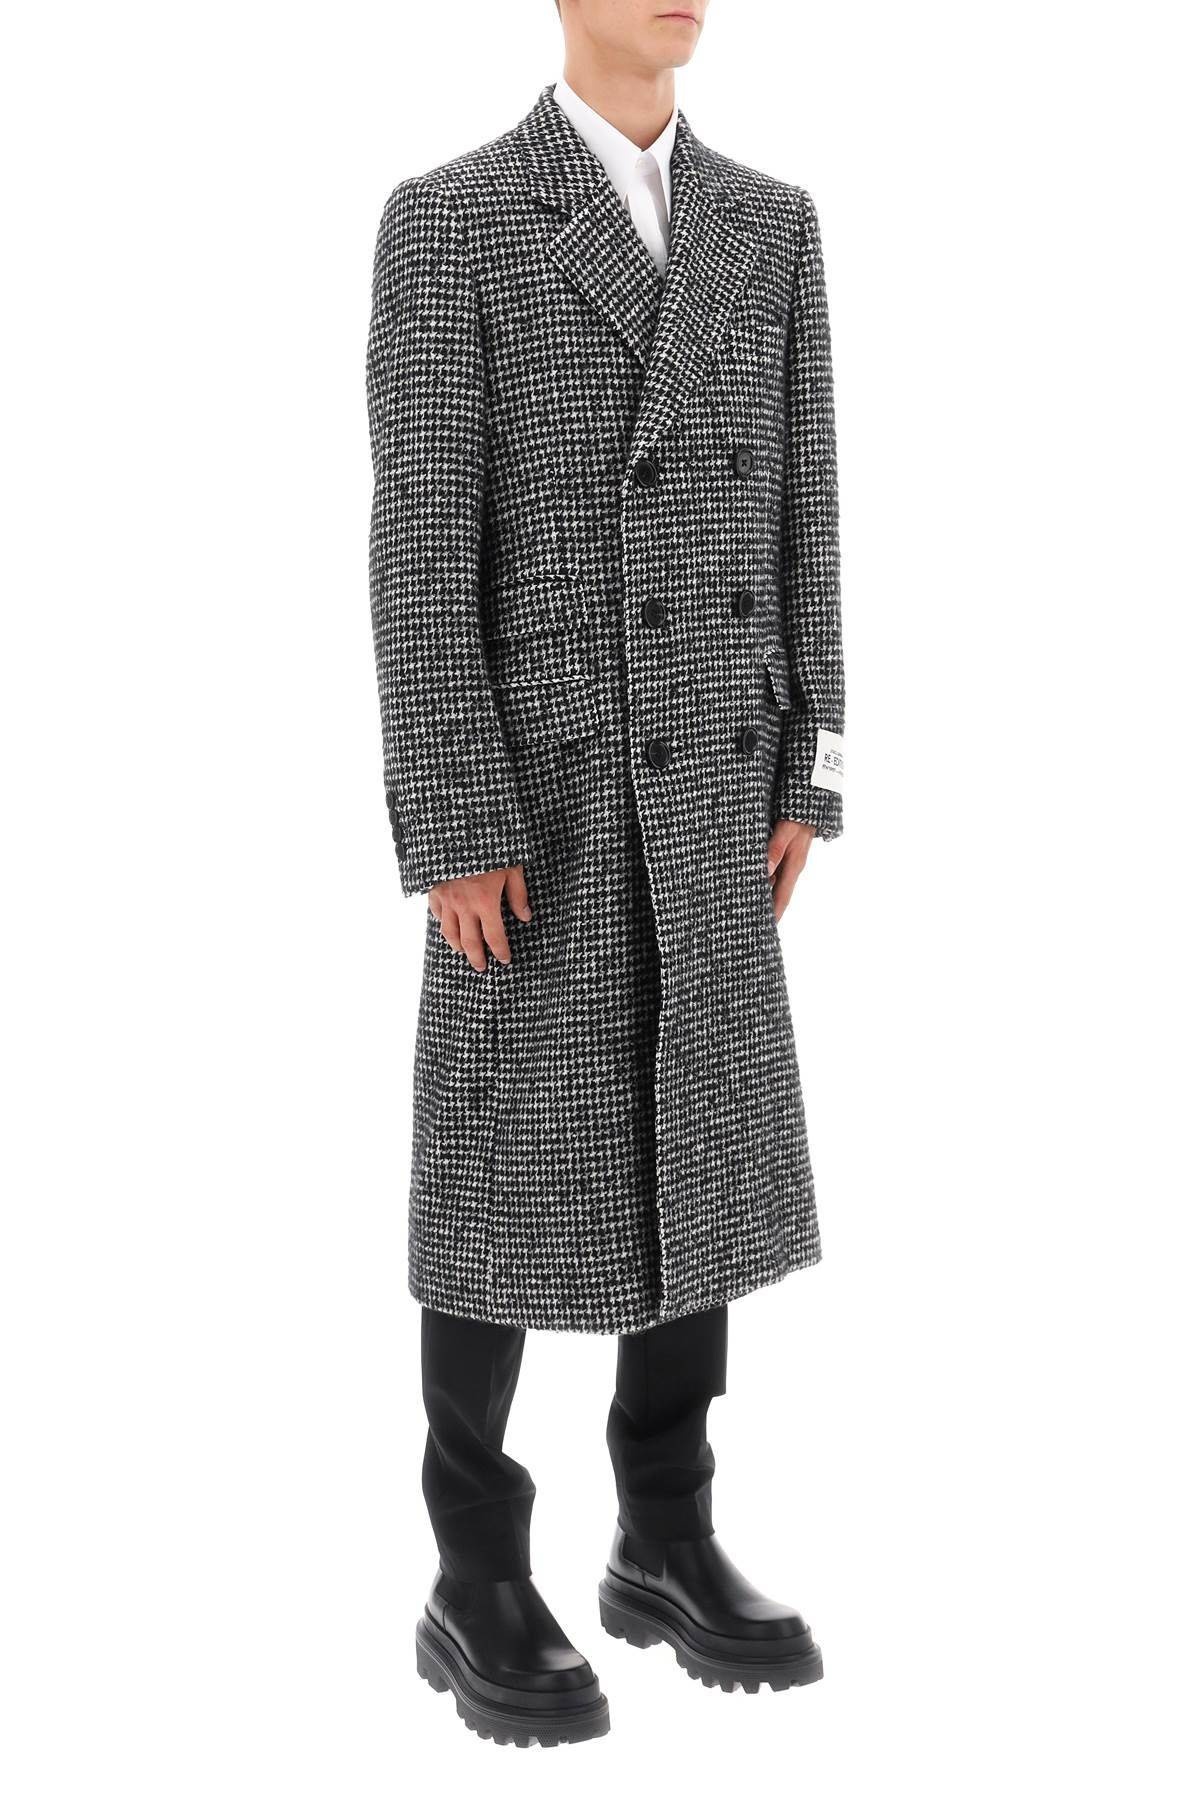 RE-EDITION COAT IN HOUNDSTOOTH WOOL - 3